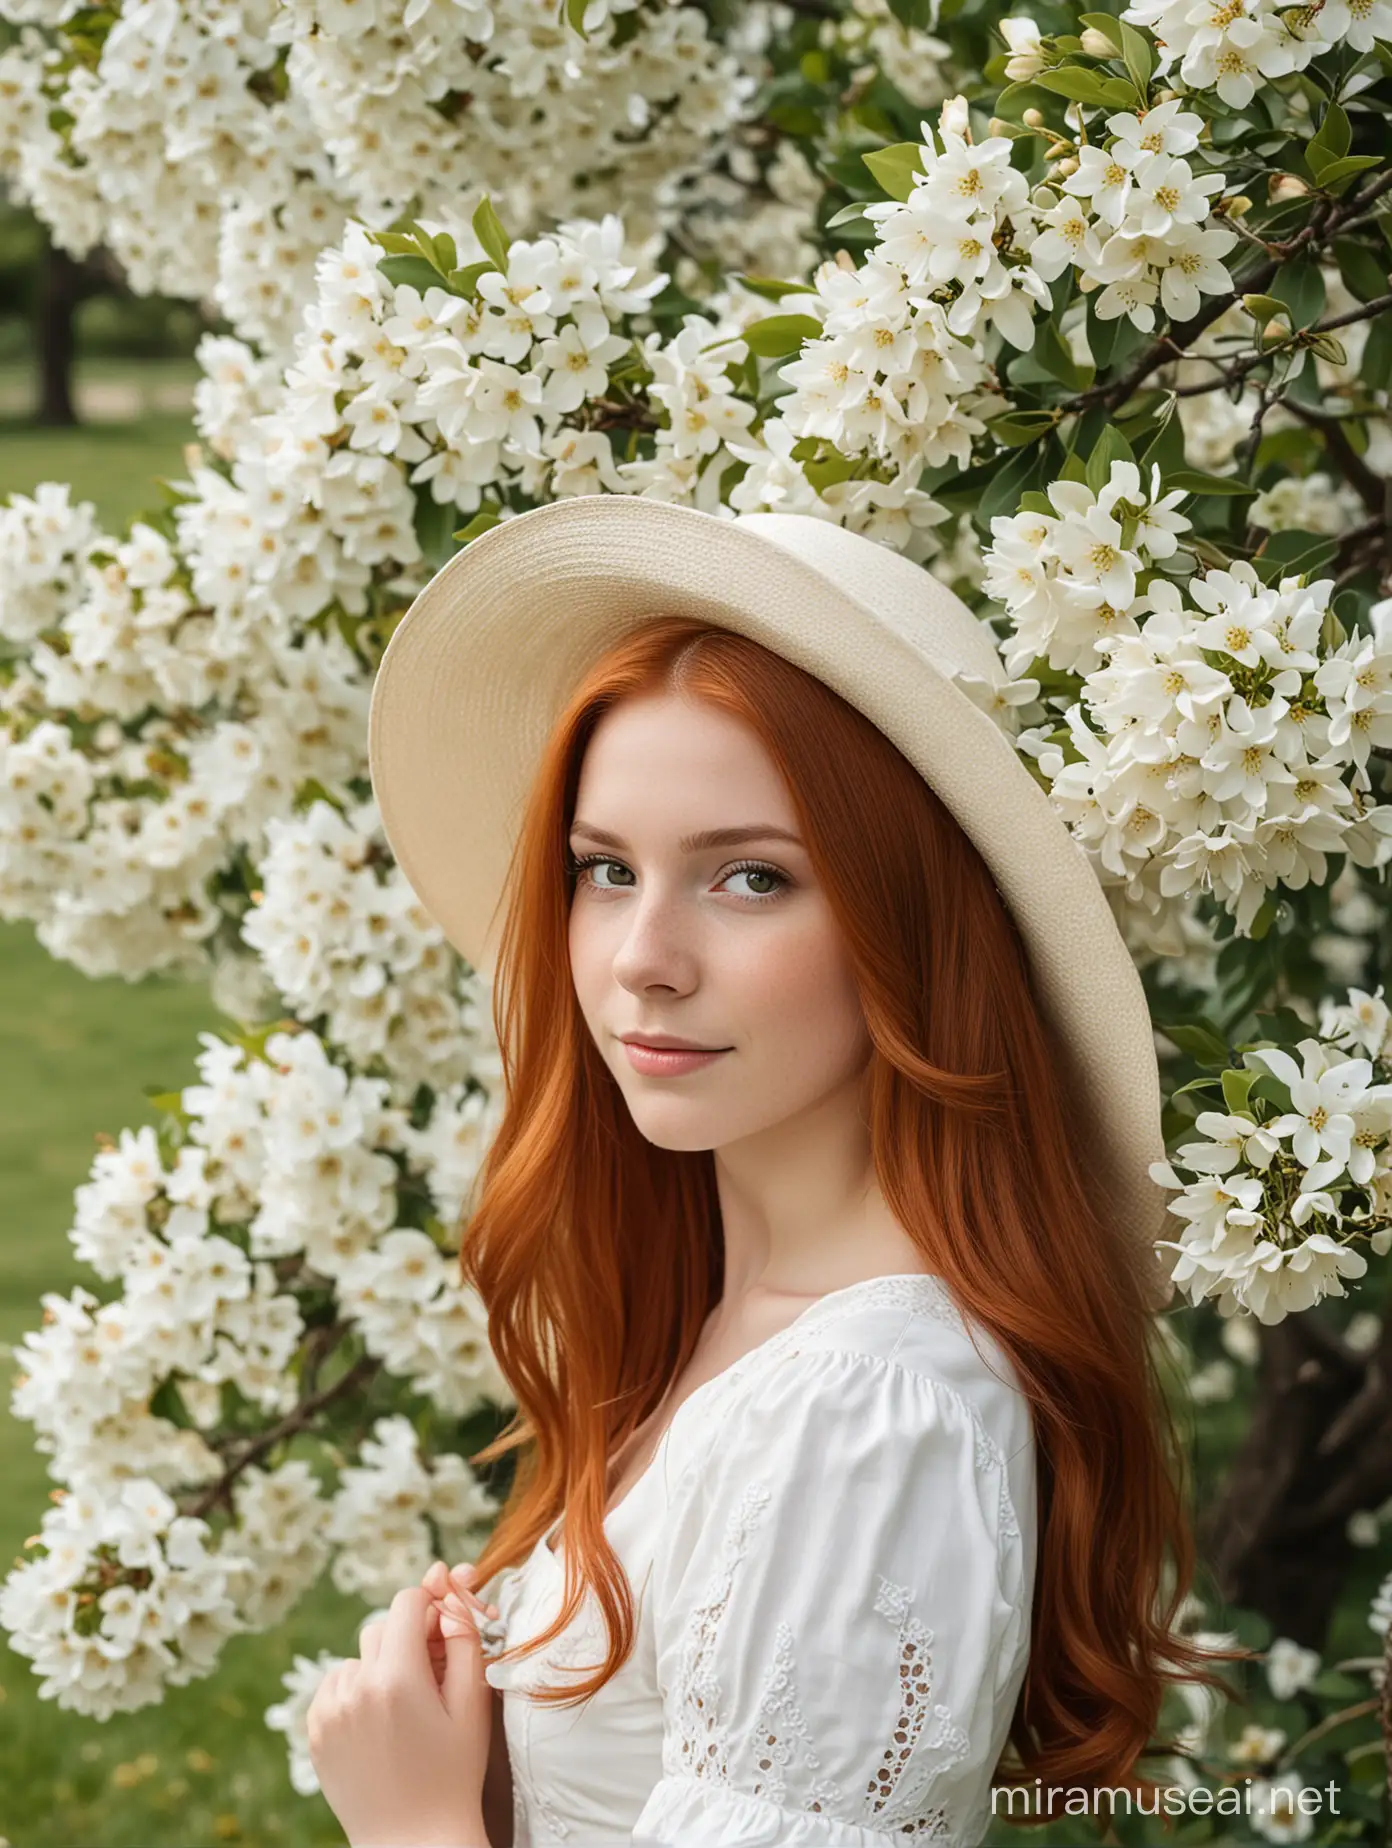 Young Girl with Red Hair and White Hat Standing by Blossoming Tree